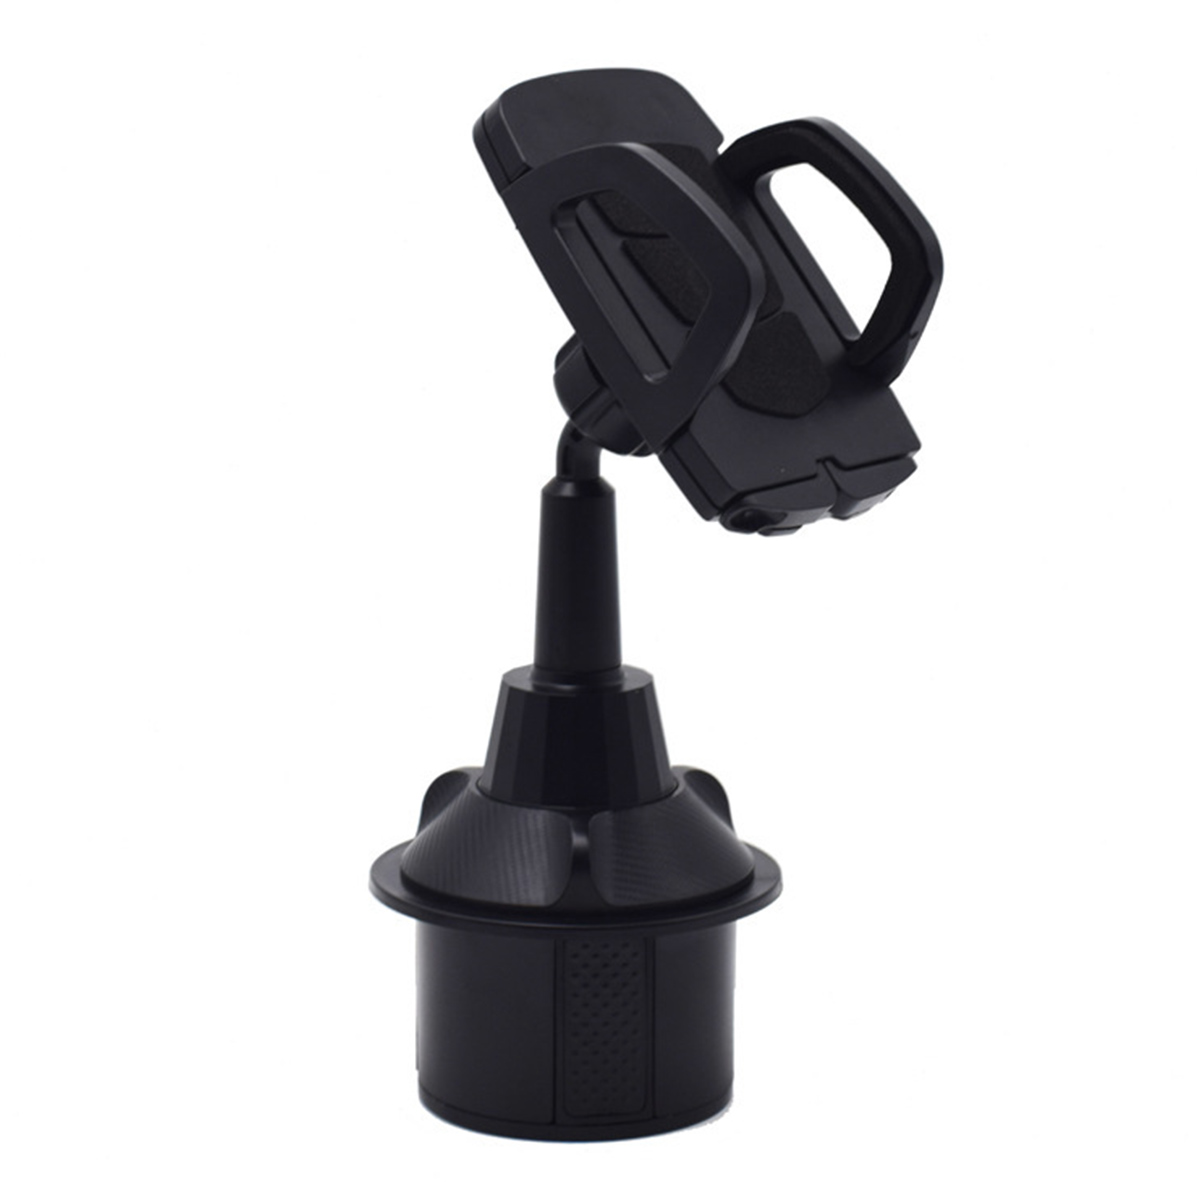 Universal-360-Rotation-Car-Phone-Mount-Gooseneck-Cup-Holder-for-5-95cm-Width-Cell-Phone-for-iPhone-1-1720314-3